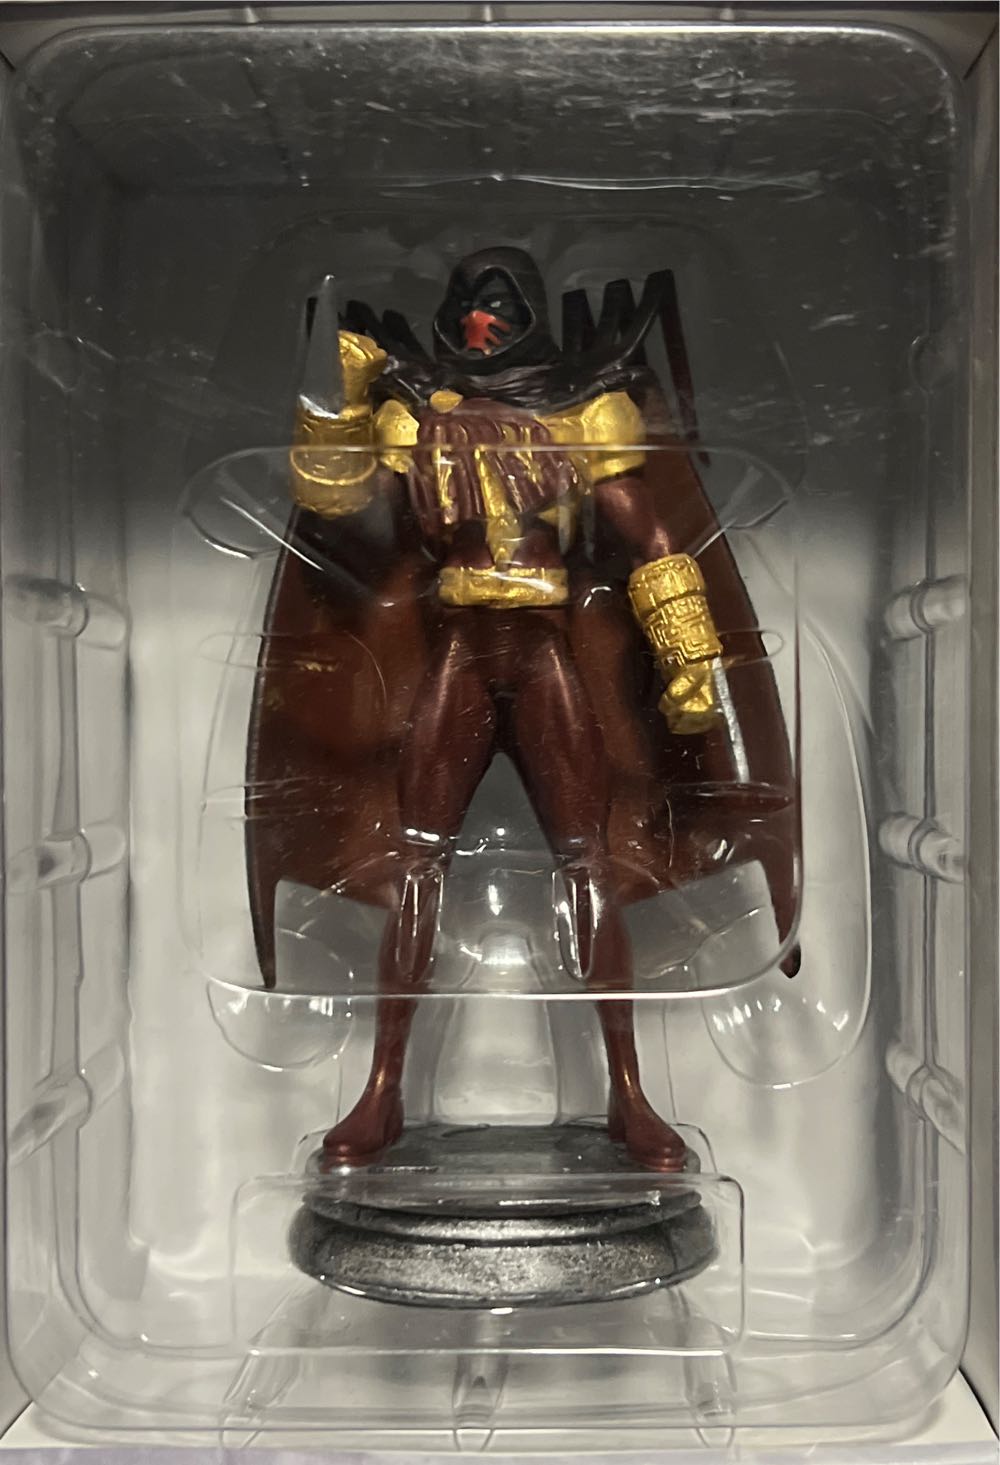 Azreal - White Pawn - Eaglemos Collections (DC Chess Collection) action figure collectible - Main Image 1